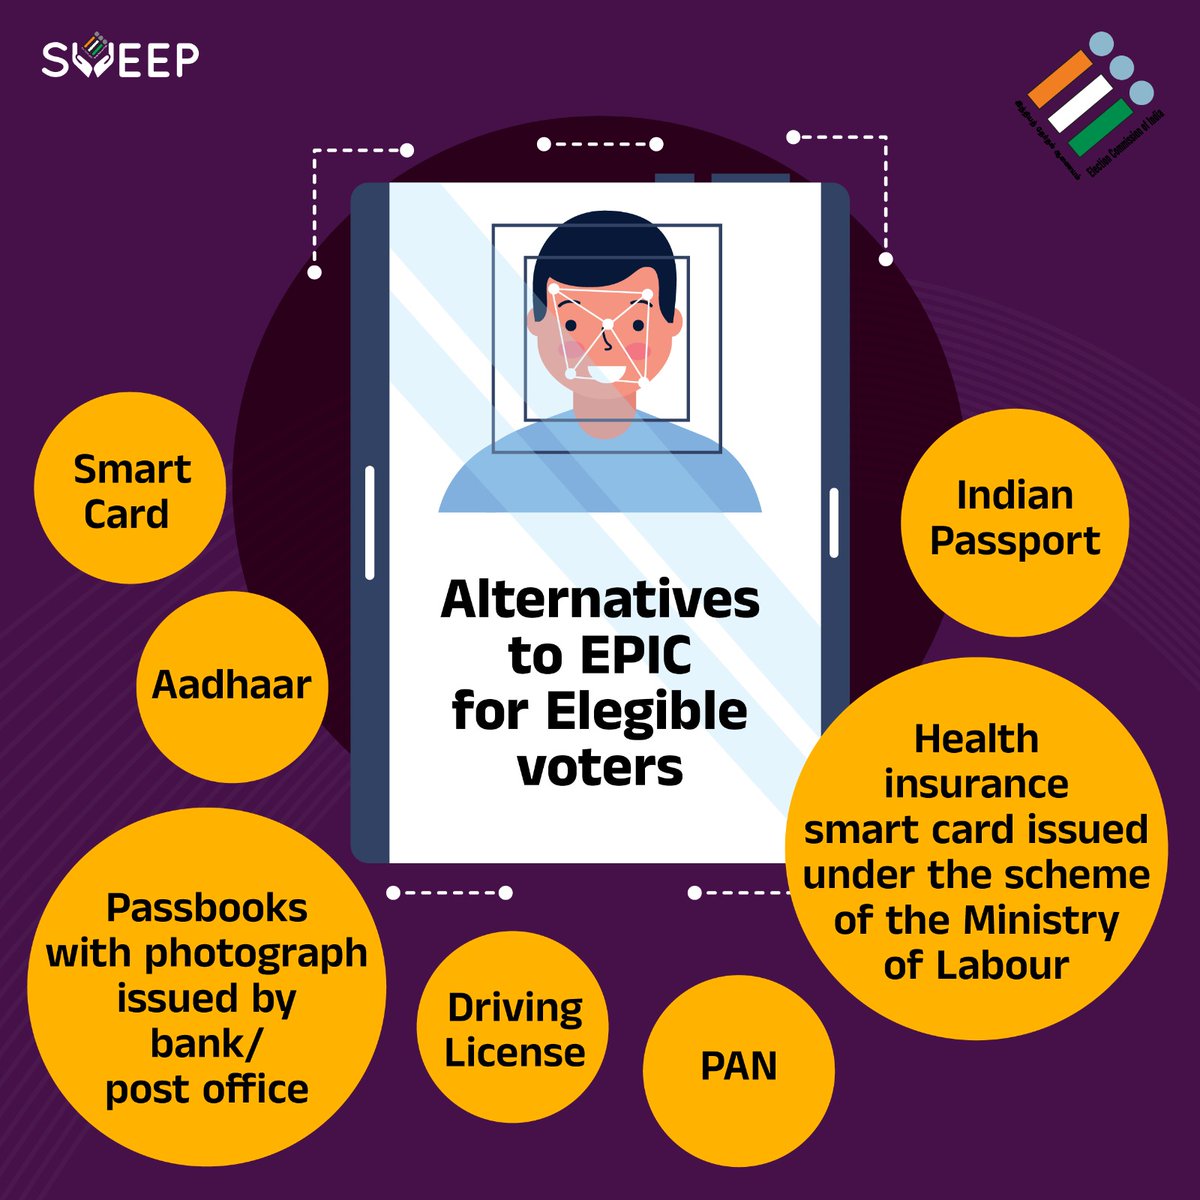 These ID proofs can be used to cast your ballots on the election day. 
Be sure to vote on April 19th, 2024.

#SVEEP #MyFirstVoteForCountry
#ChiefElectoralOfficer_TamilNadu
#LoksabhaElection2024 #TNelection2024
#VoteIndia #Election2024  #DemocracyMatters #ElectionCommisionOfIndia